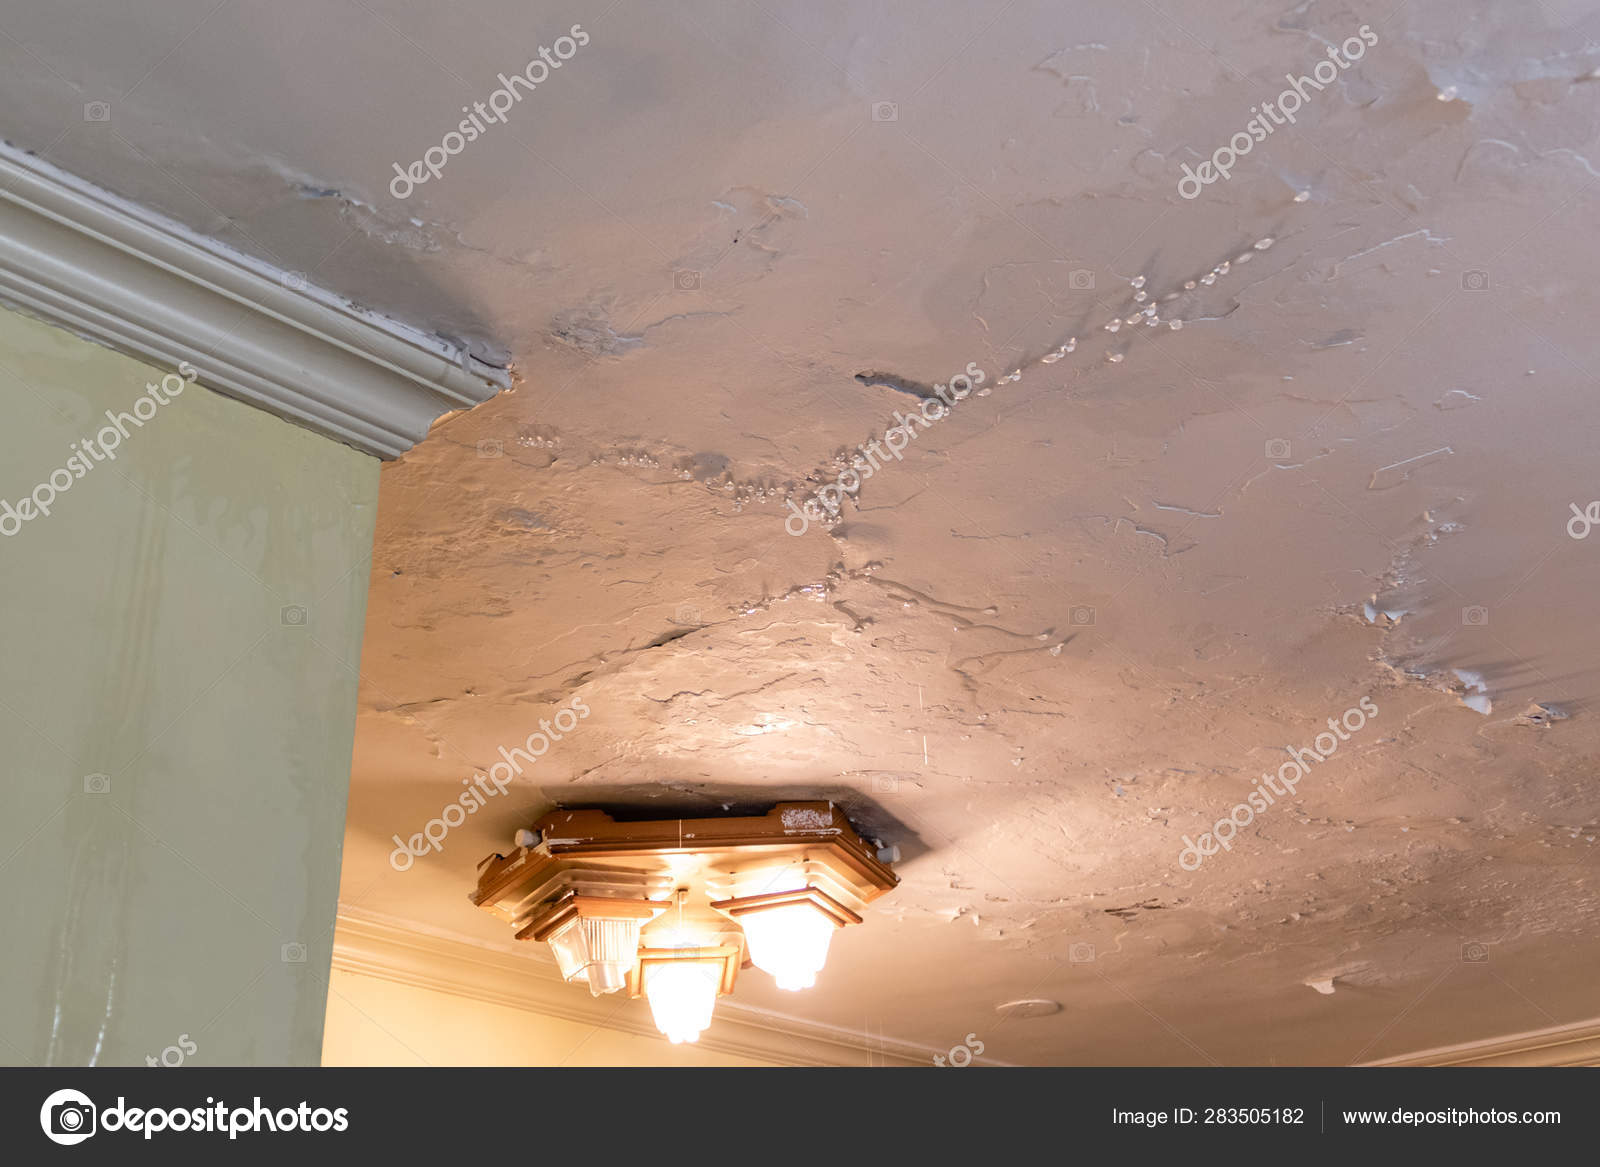 Water Dripping From Leaking Ceiling Stock Photo